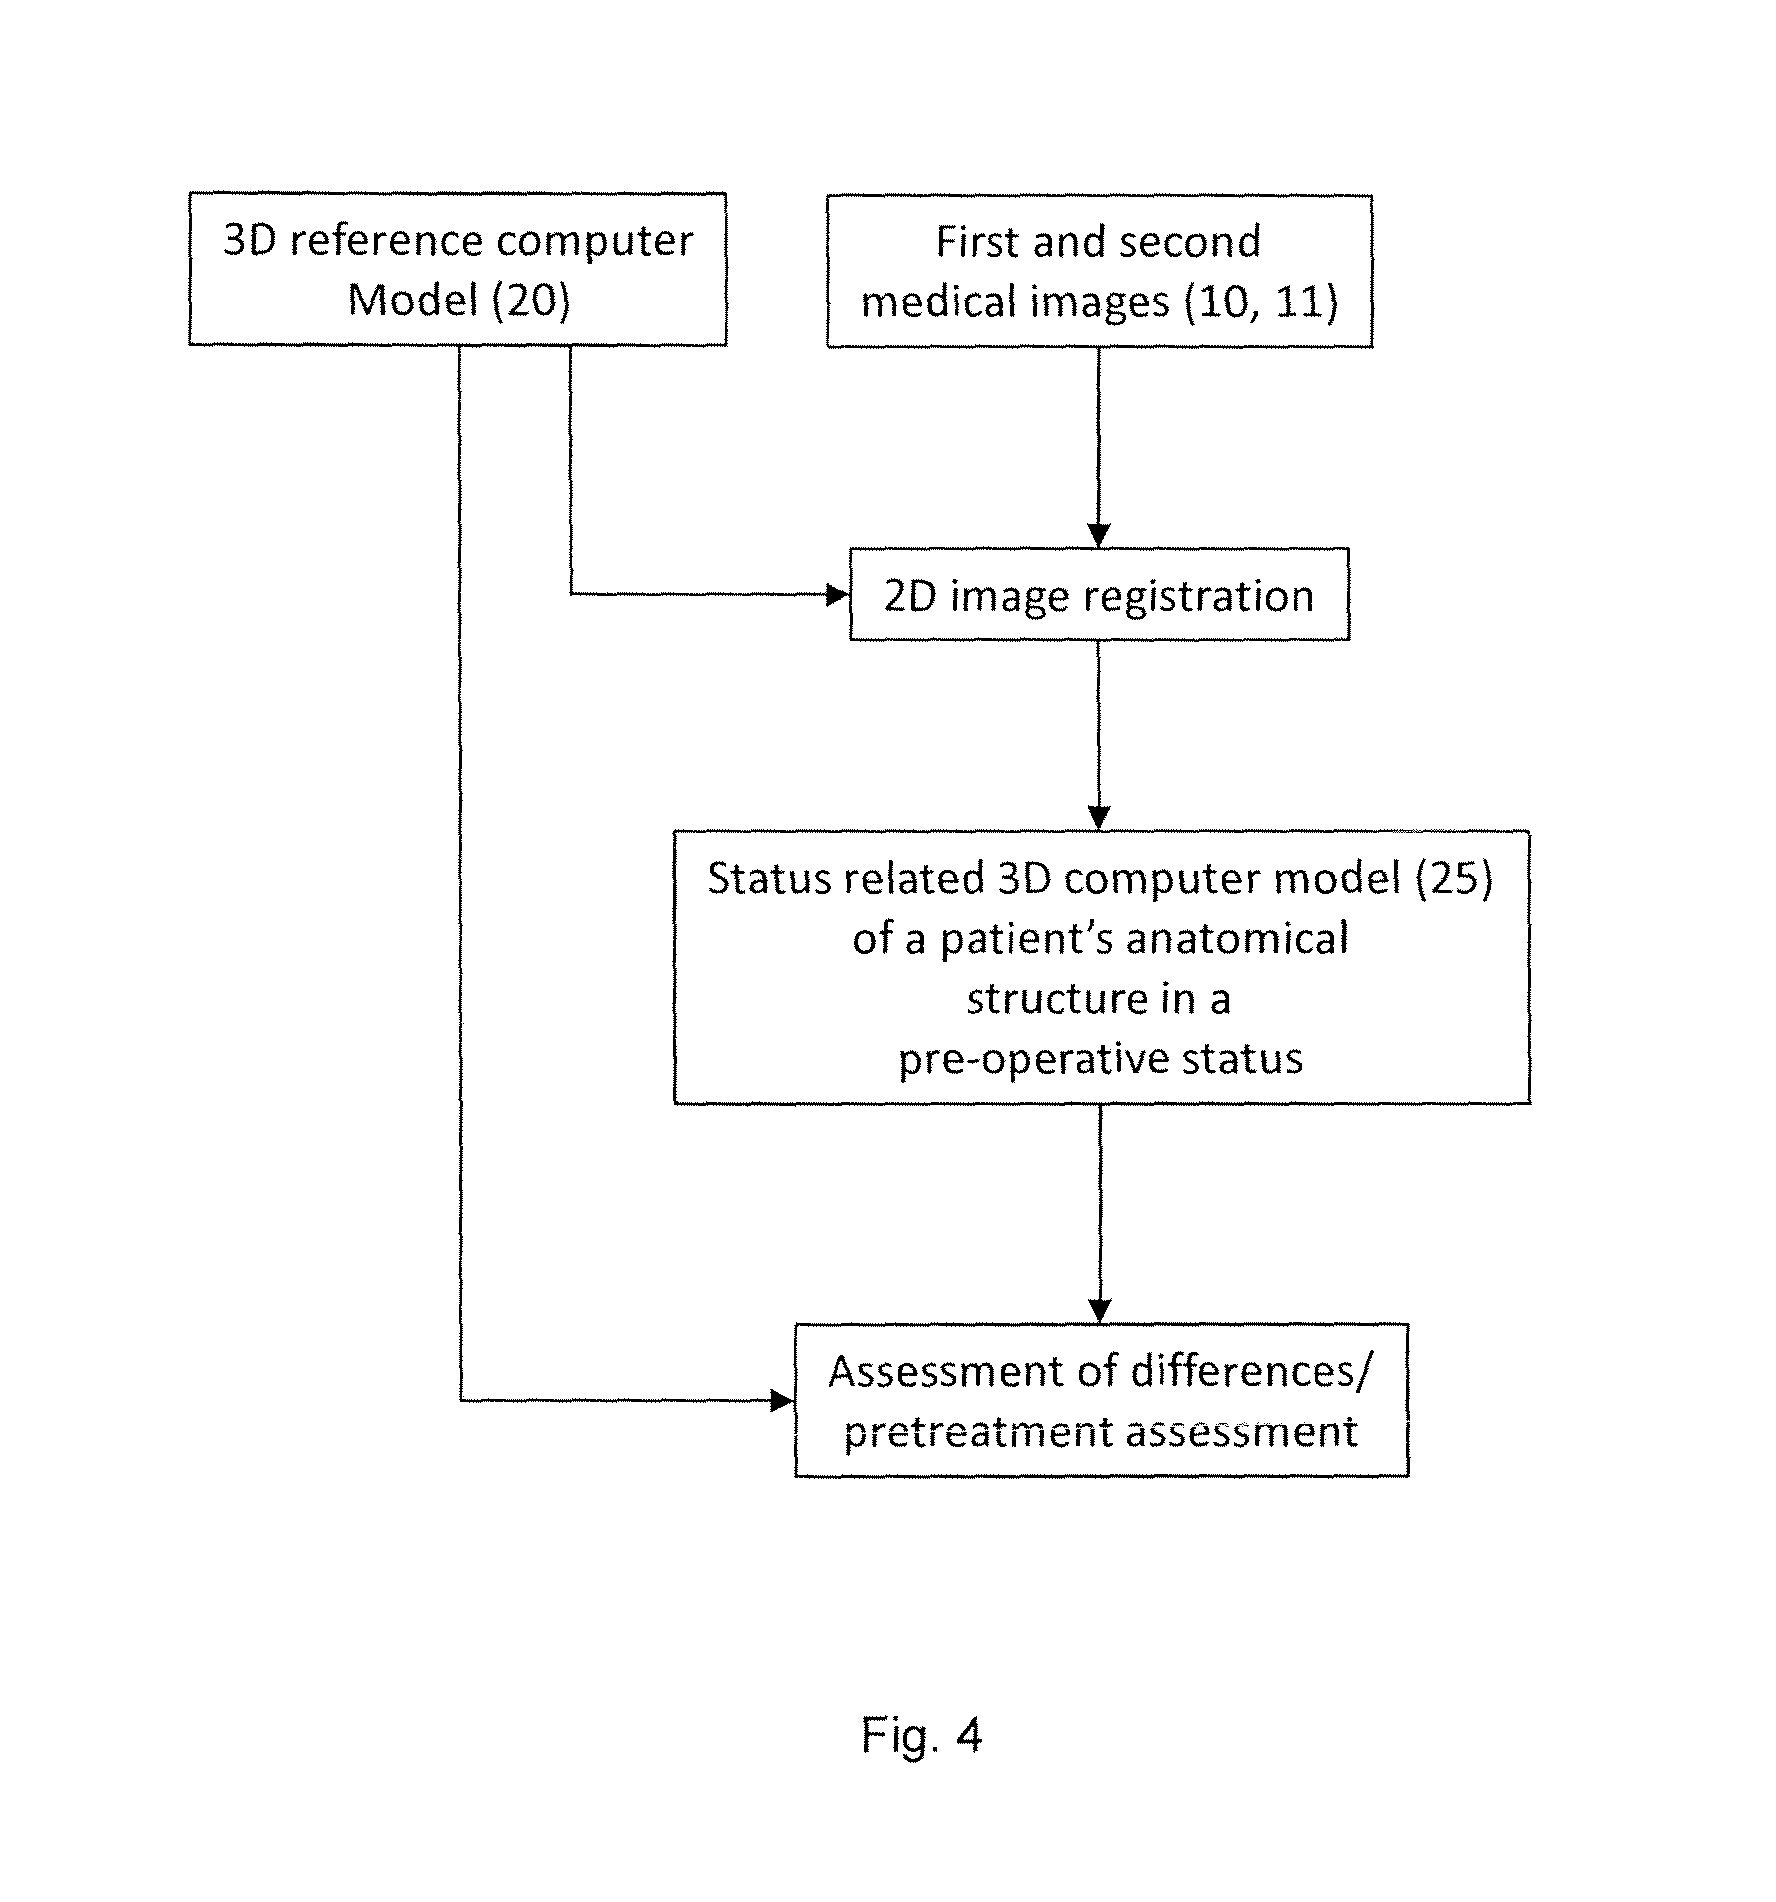 Method for generating a 3D reference computer model of at least one anatomical structure